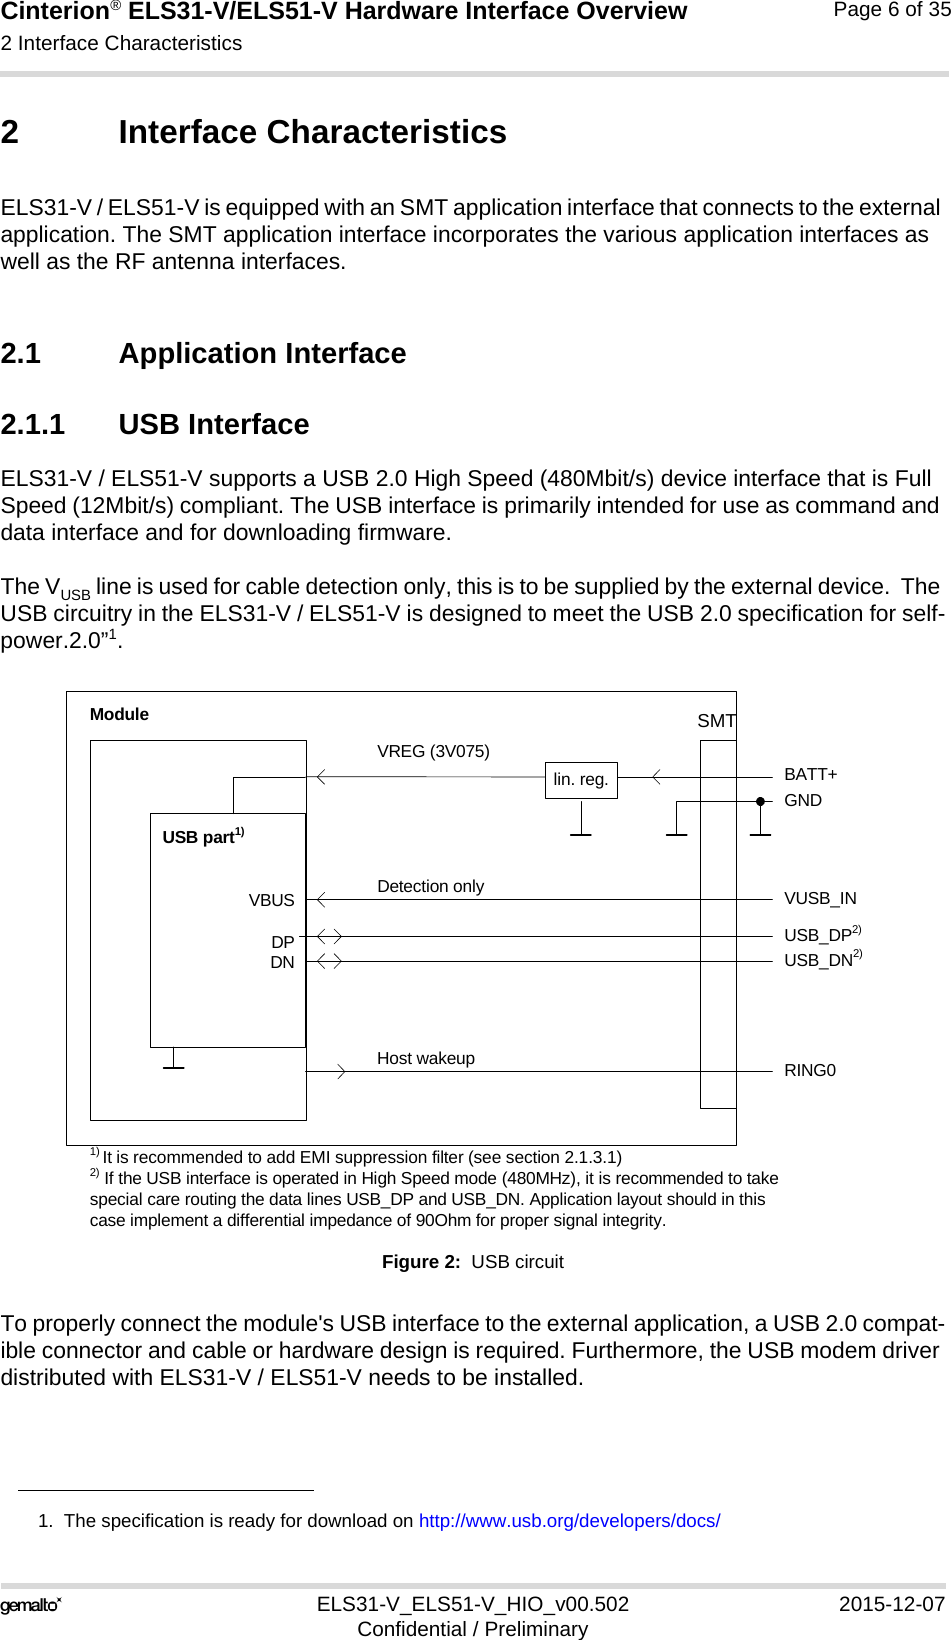 Cinterion® ELS31-V/ELS51-V Hardware Interface Overview2 Interface Characteristics17ELS31-V_ELS51-V_HIO_v00.502 2015-12-07Confidential / PreliminaryPage 6 of 352 Interface CharacteristicsELS31-V / ELS51-V is equipped with an SMT application interface that connects to the external application. The SMT application interface incorporates the various application interfaces as well as the RF antenna interfaces. 2.1 Application Interface2.1.1 USB InterfaceELS31-V / ELS51-V supports a USB 2.0 High Speed (480Mbit/s) device interface that is Full Speed (12Mbit/s) compliant. The USB interface is primarily intended for use as command and data interface and for downloading firmware. The VUSB line is used for cable detection only, this is to be supplied by the external device.  The USB circuitry in the ELS31-V / ELS51-V is designed to meet the USB 2.0 specification for self-power.2.0”1.Figure 2:  USB circuitTo properly connect the module&apos;s USB interface to the external application, a USB 2.0 compat-ible connector and cable or hardware design is required. Furthermore, the USB modem driver distributed with ELS31-V / ELS51-V needs to be installed.1.  The specification is ready for download on http://www.usb.org/developers/docs/VBUSDPDNVREG (3V075)BATT+USB_DP2)lin. reg. GNDModuleDetection only VUSB_INUSB part1)RING0Host wakeup1) It is recommended to add EMI suppression filter (see section 2.1.3.1)USB_DN2)2) If the USB interface is operated in High Speed mode (480MHz), it is recommended to take special care routing the data lines USB_DP and USB_DN. Application layout should in this case implement a differential impedance of 90Ohm for proper signal integrity.SMT